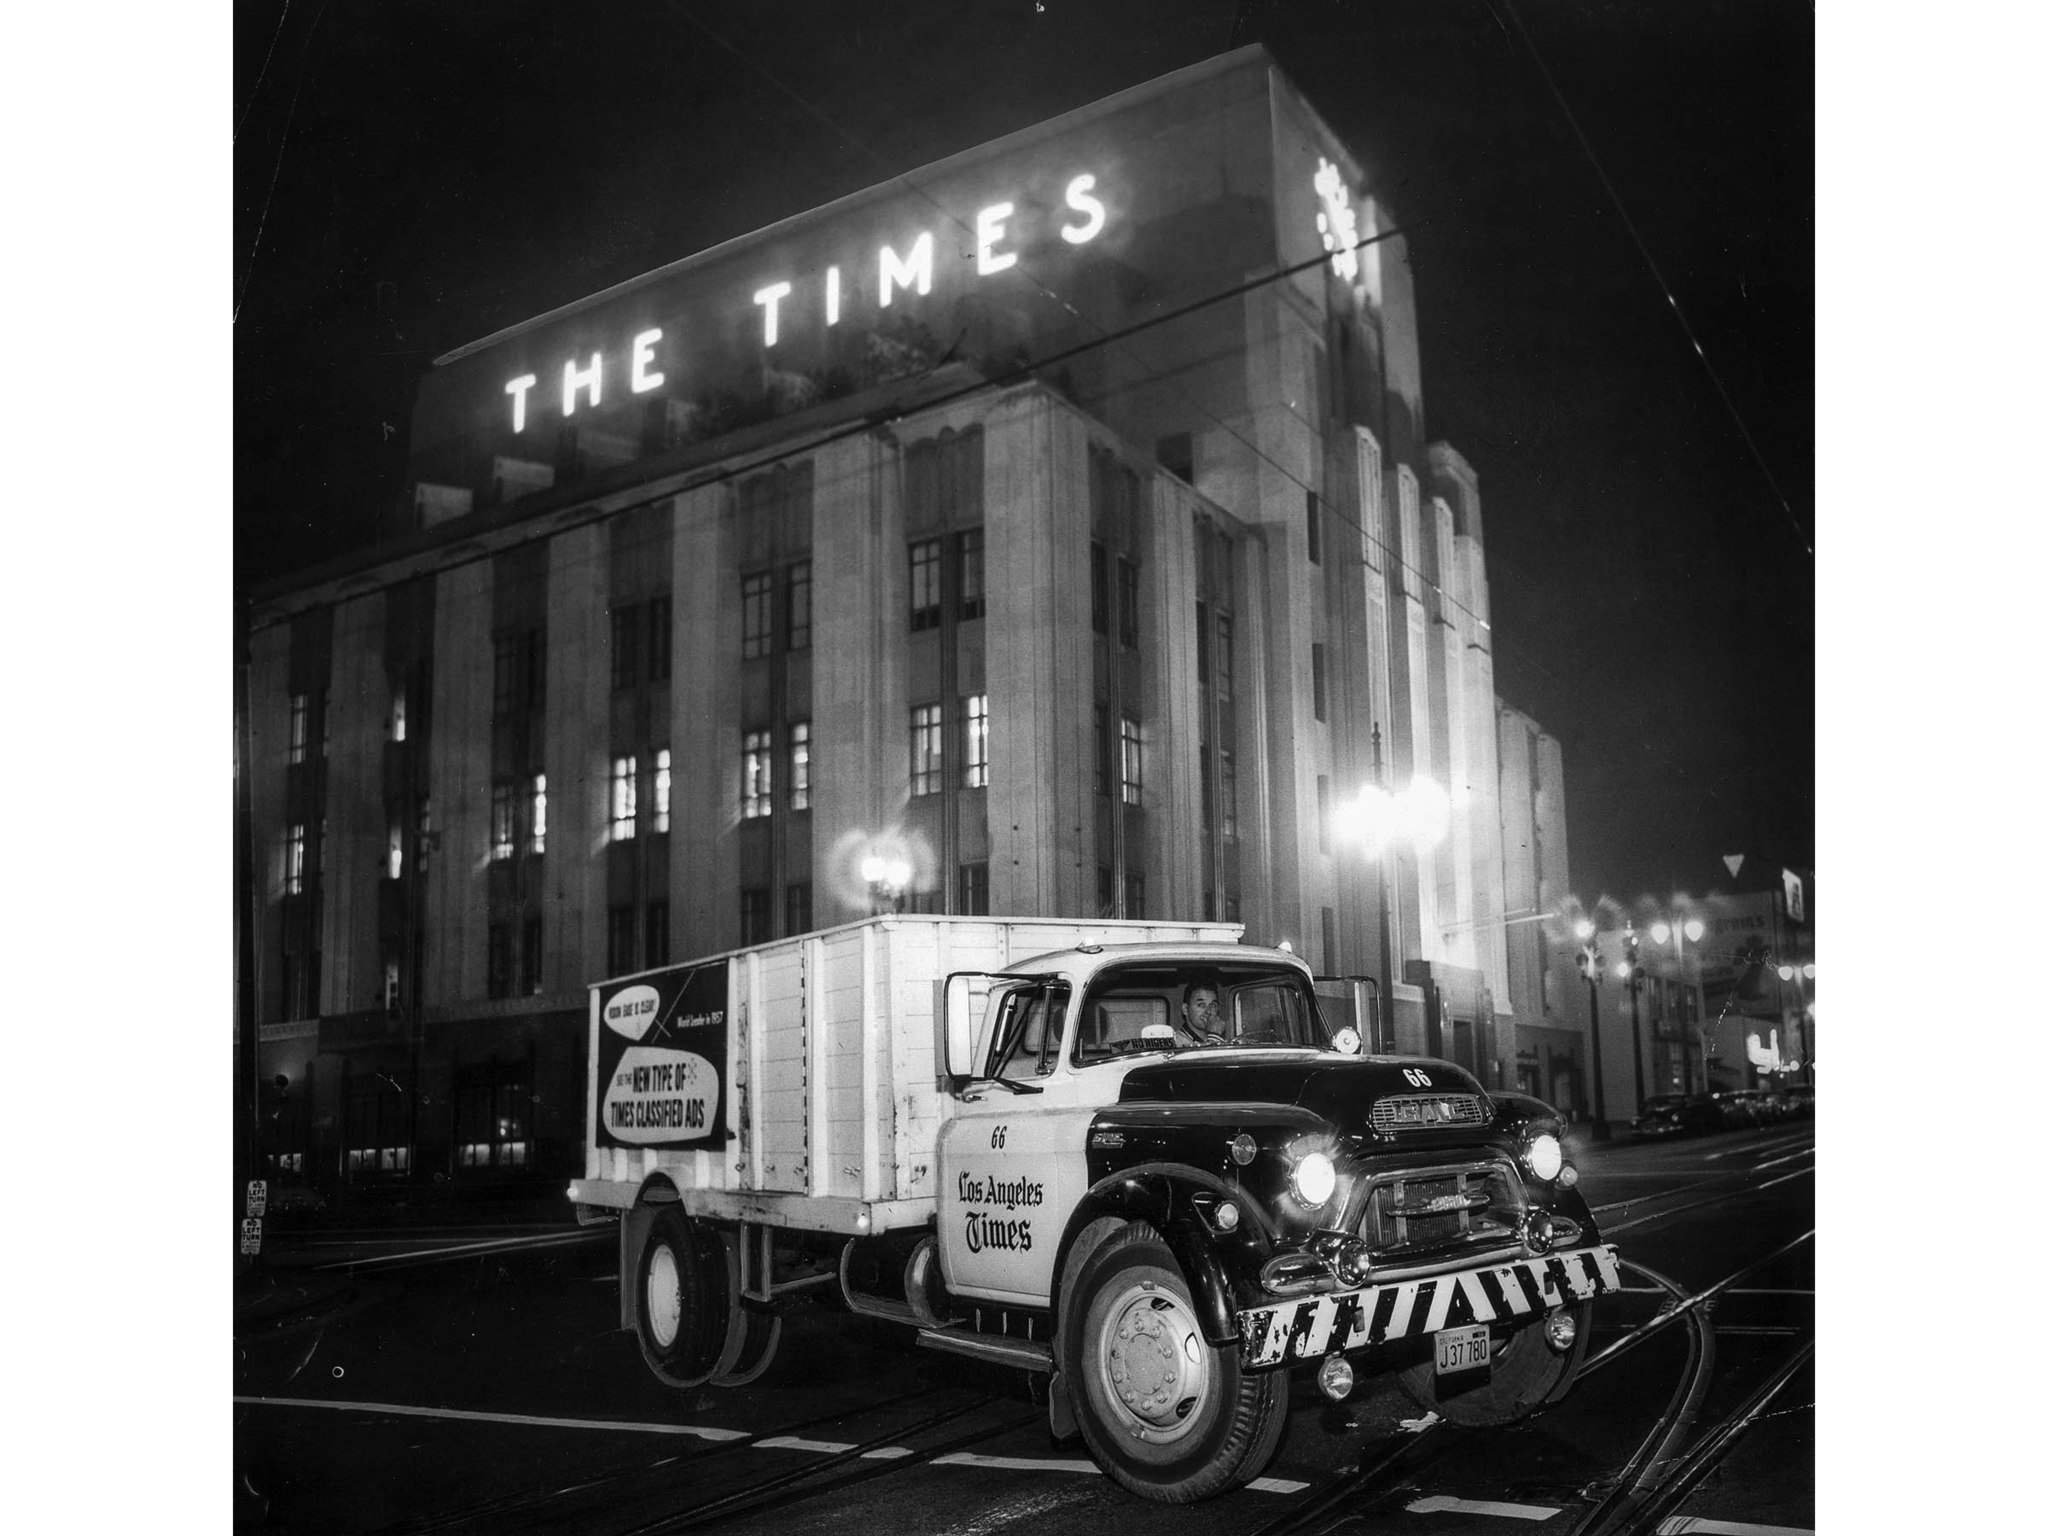 Dec. 1, 1957: Los Angeles Times truck, one of a fleet of 70, leaves the Times building with five ton